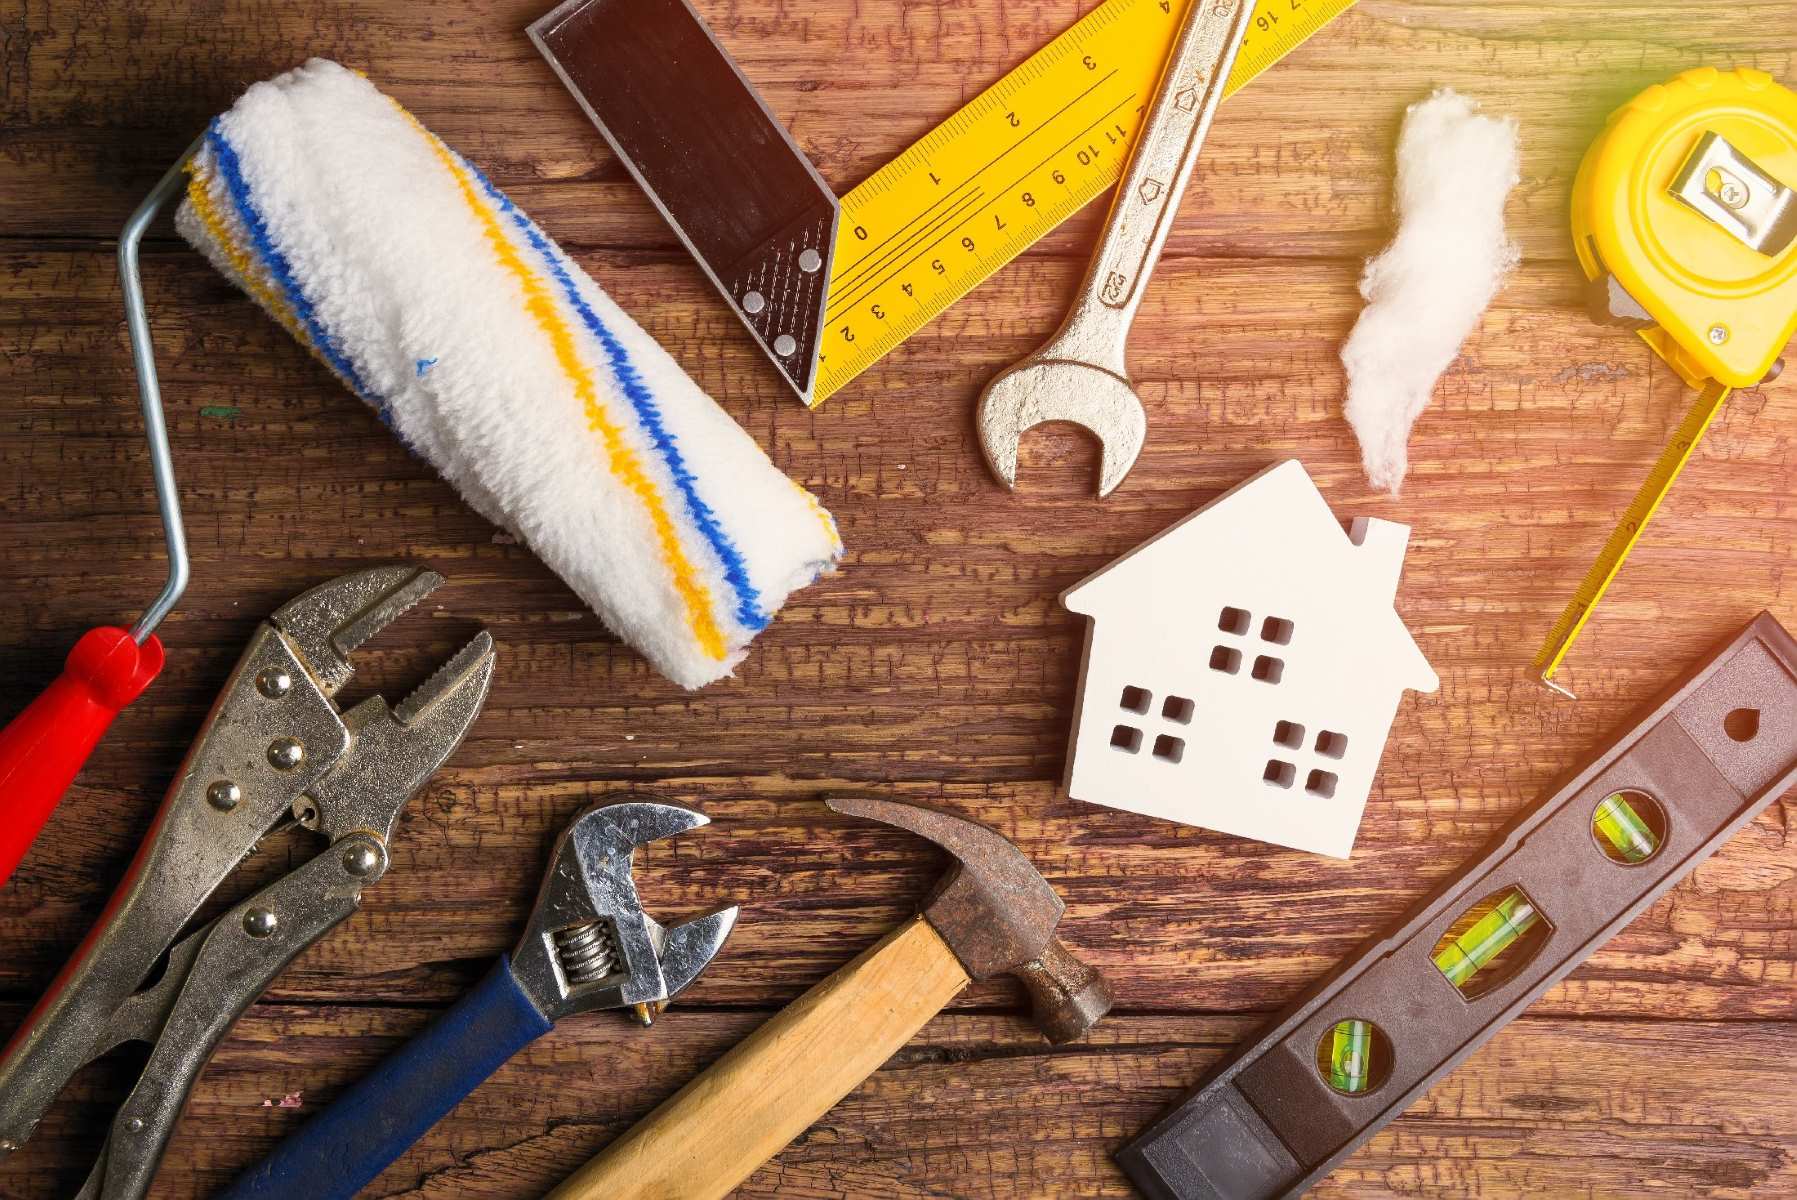 What Is The Difference Between Home Maintenance And Home Improvement?